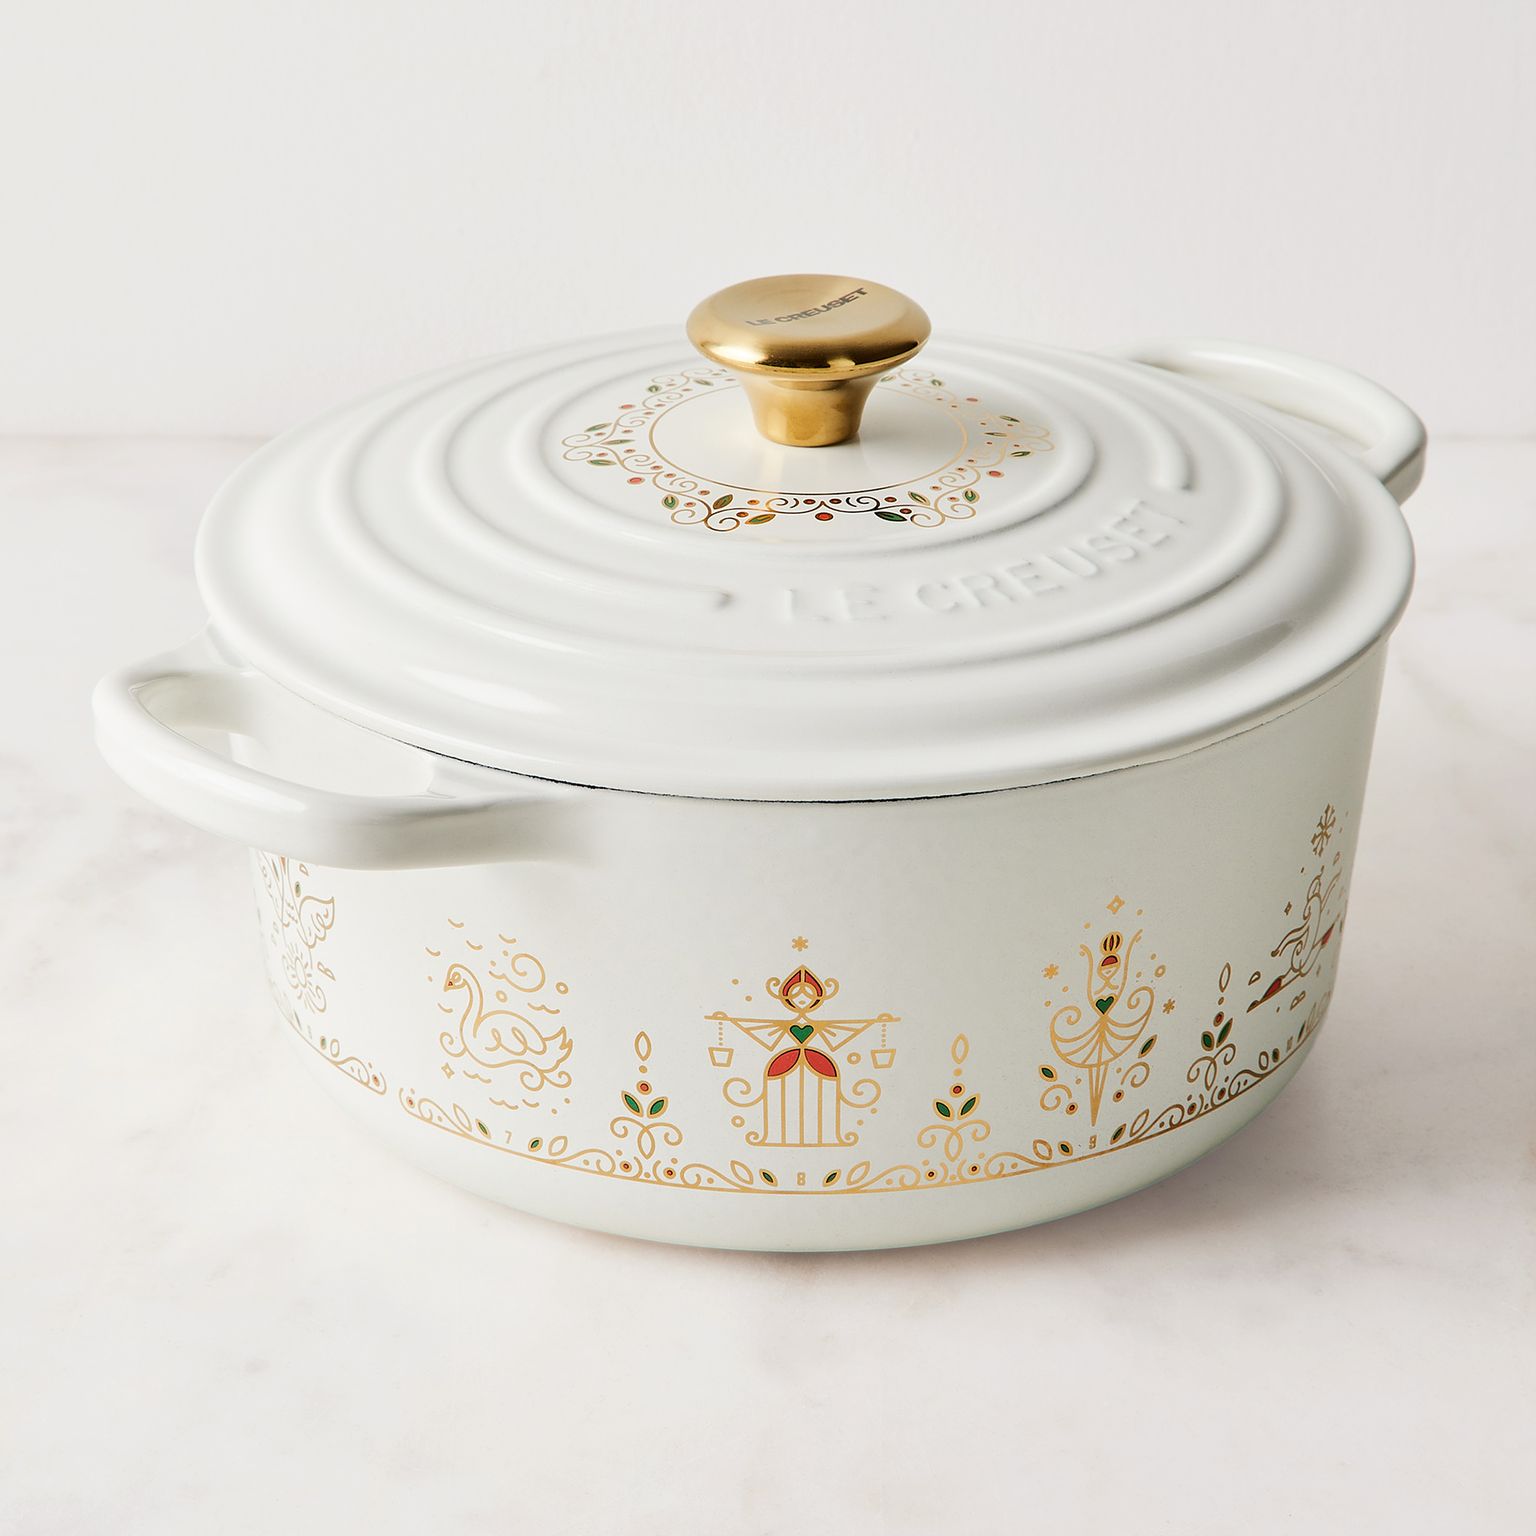 Le Creuset Just Released the Most Magical Holiday Dutch Oven We've